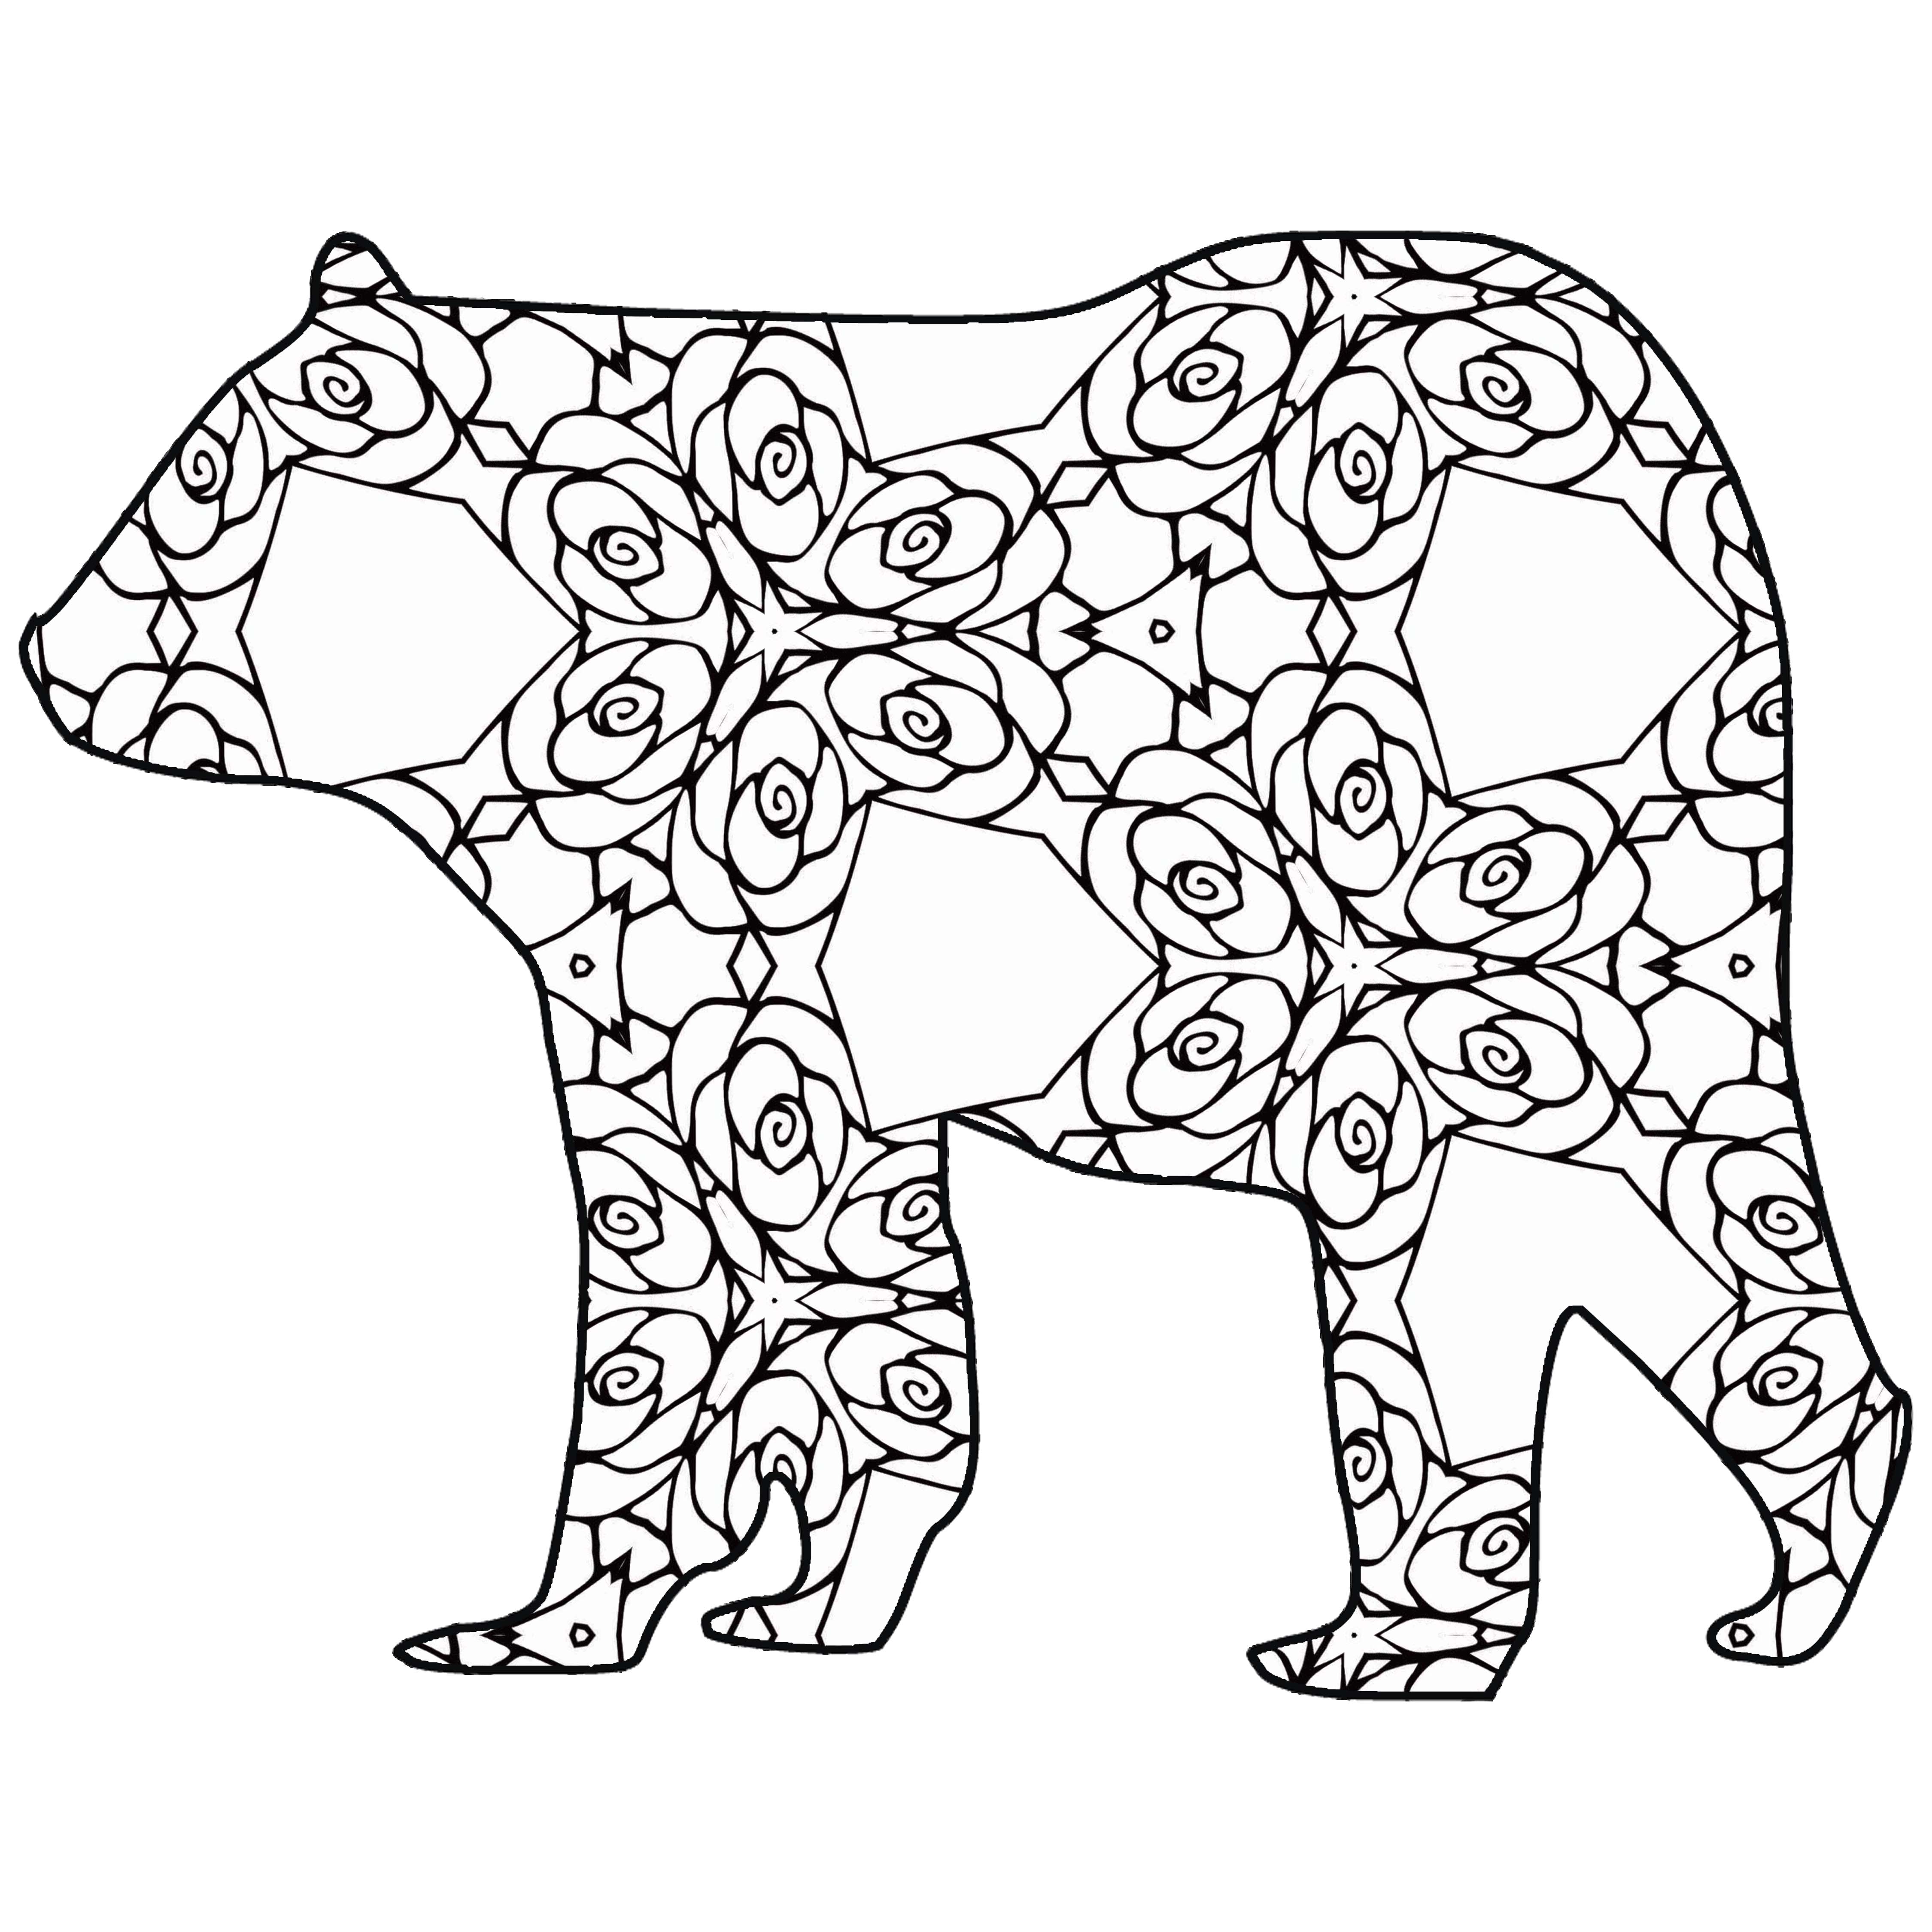 30 Free Printable Geometric Animal Coloring Pages | The ...